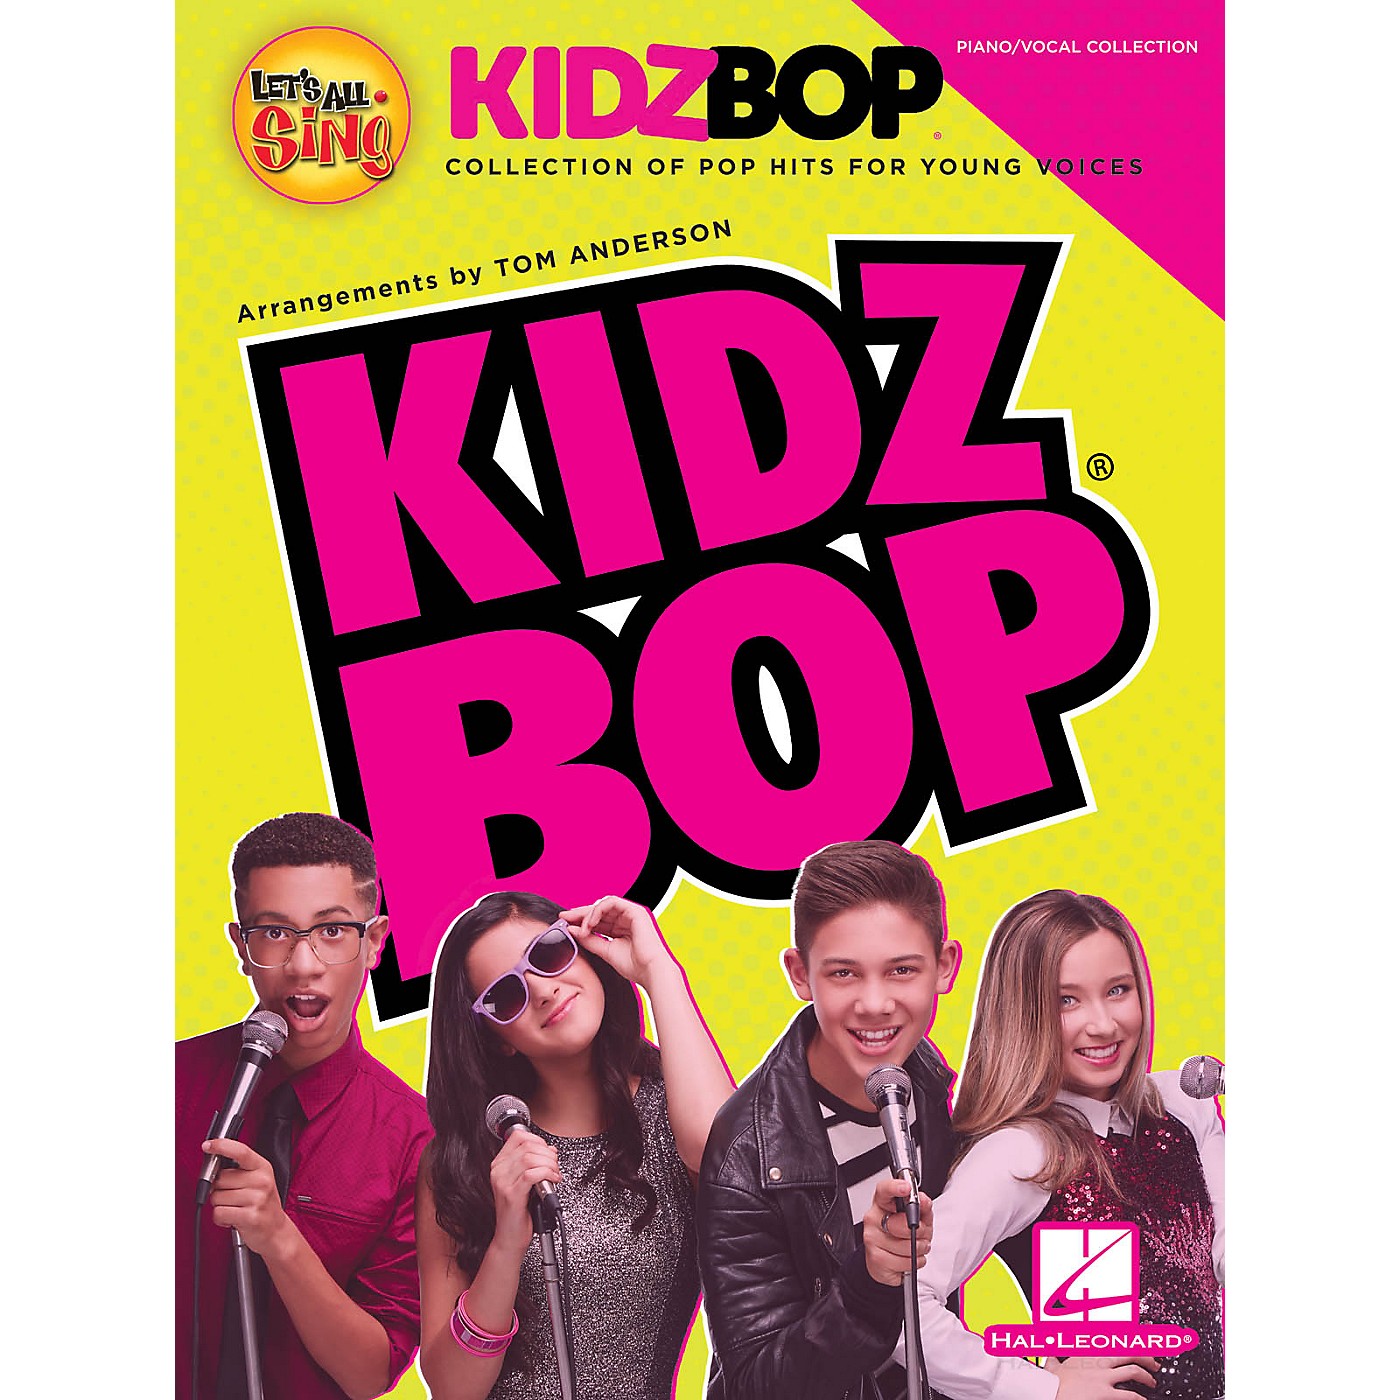 Hal Leonard Let's All Sing KIDZ BOP (Collection for Young Voices) Performance/Accompaniment CD by Tom Anderson thumbnail